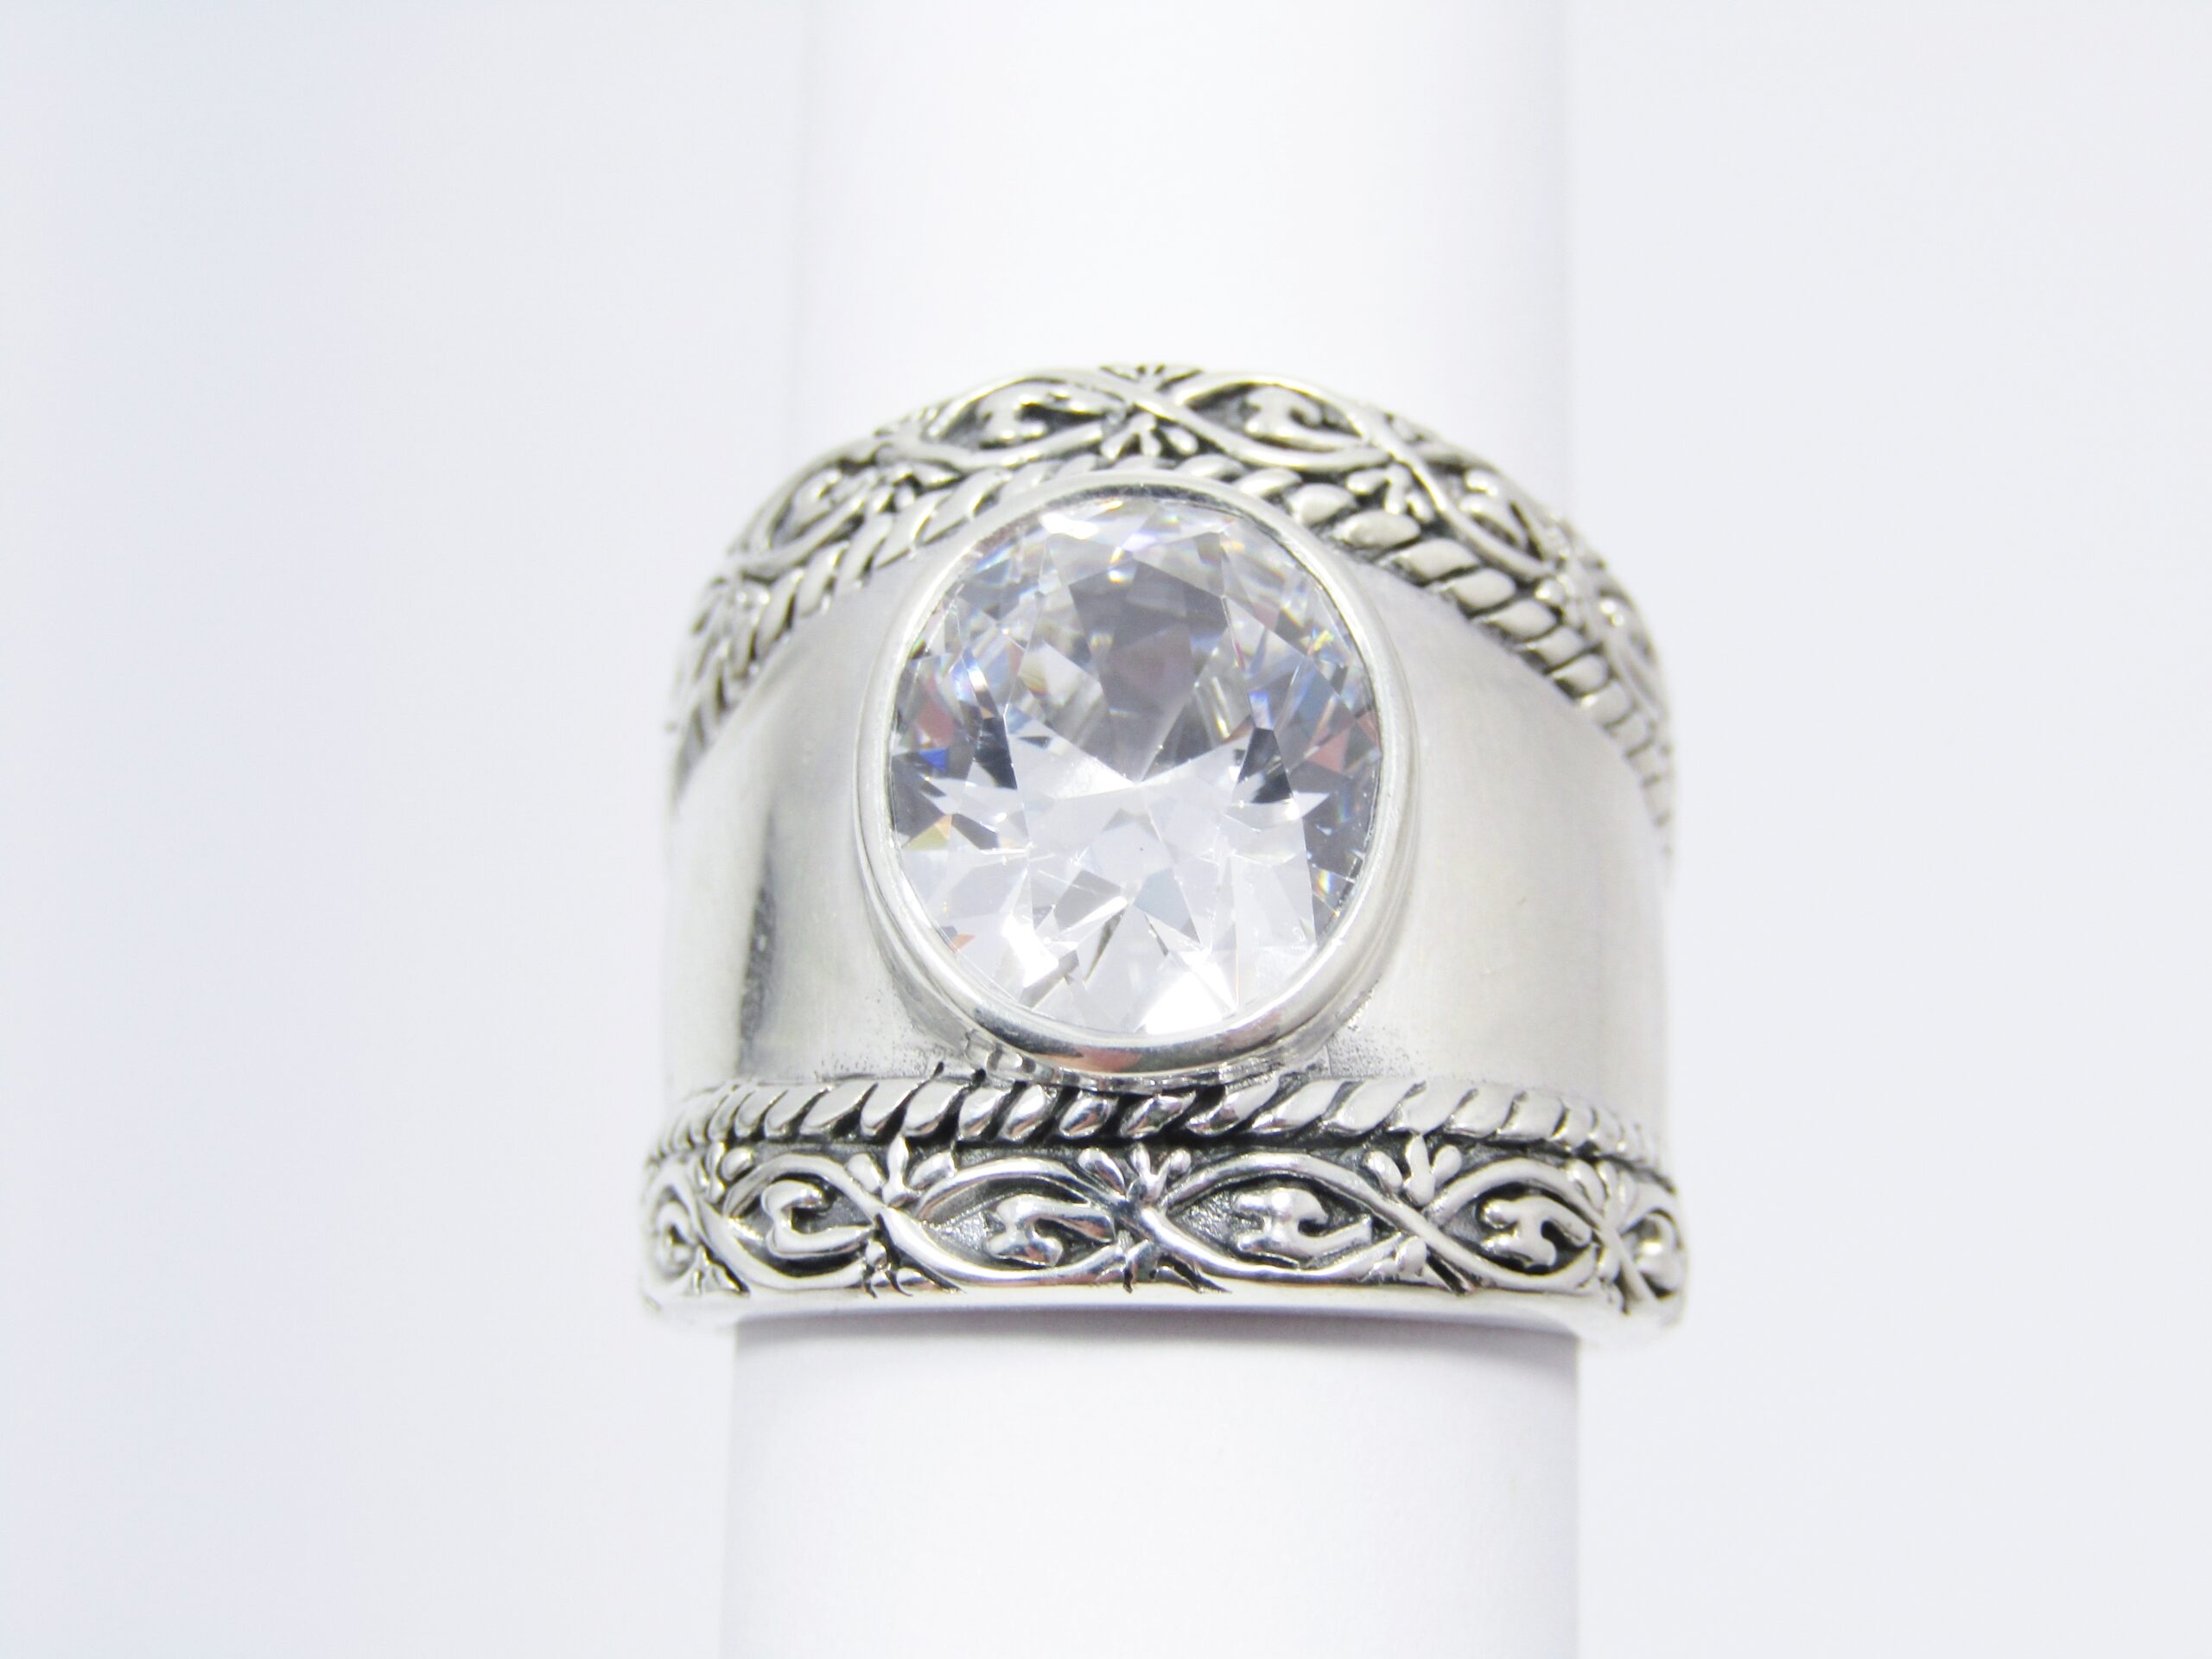 A Gorgeous Chunky Clear Zirconia Ring in Sterling Silver.